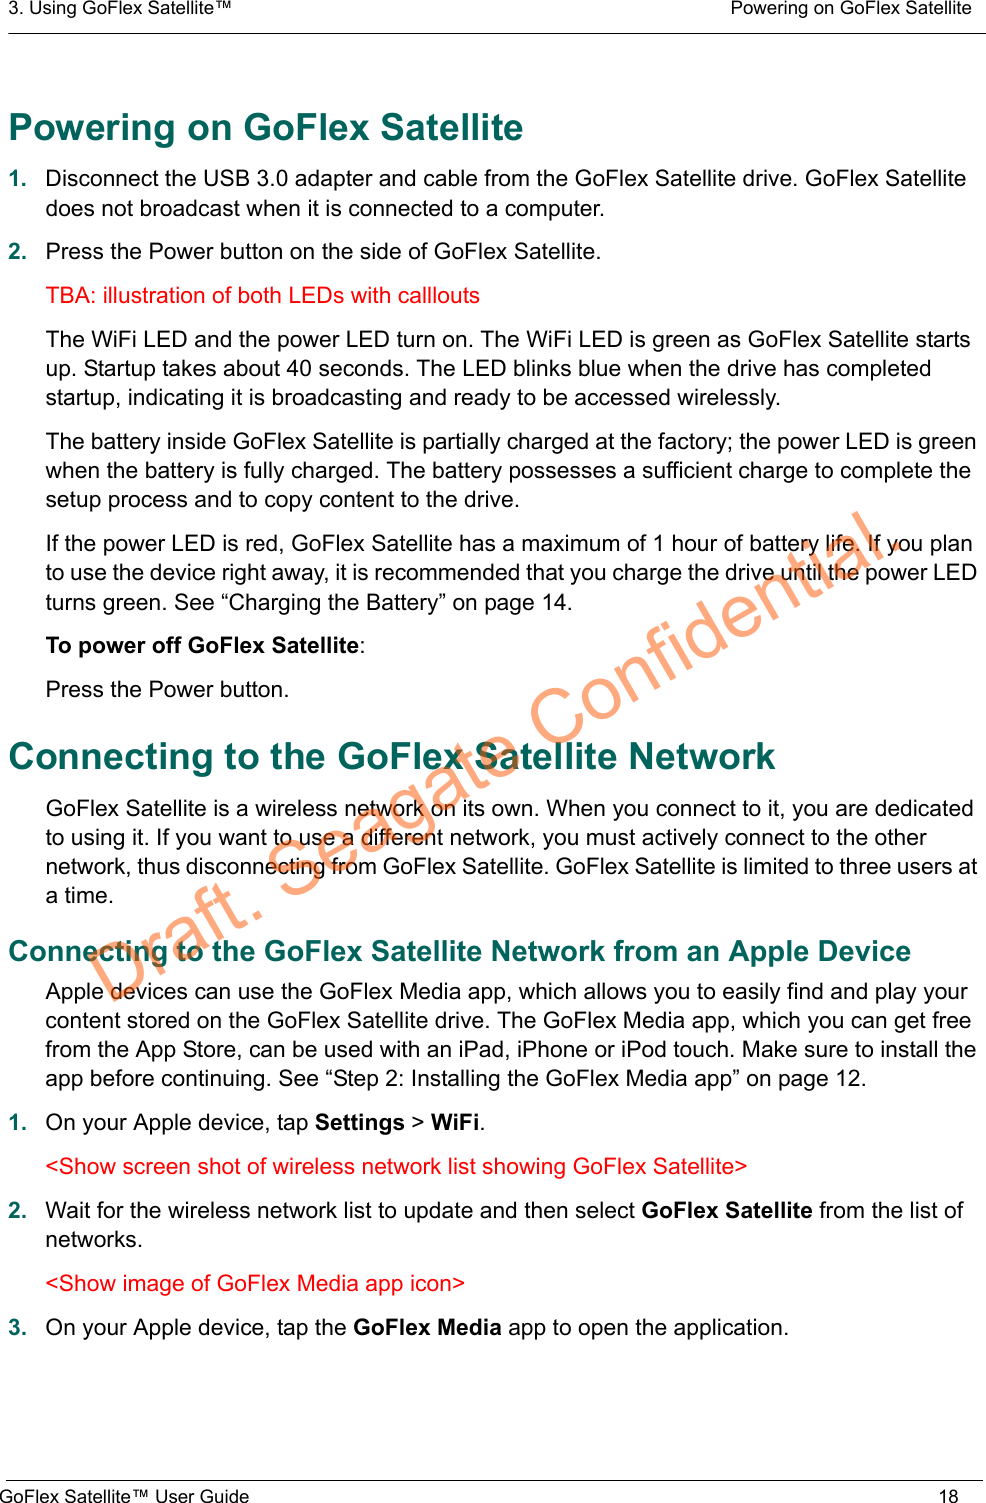 3. Using GoFlex Satellite™  Powering on GoFlex SatelliteGoFlex Satellite™ User Guide 18Powering on GoFlex Satellite1. Disconnect the USB 3.0 adapter and cable from the GoFlex Satellite drive. GoFlex Satellite does not broadcast when it is connected to a computer.2. Press the Power button on the side of GoFlex Satellite.TBA: illustration of both LEDs with callloutsThe WiFi LED and the power LED turn on. The WiFi LED is green as GoFlex Satellite starts up. Startup takes about 40 seconds. The LED blinks blue when the drive has completed startup, indicating it is broadcasting and ready to be accessed wirelessly.The battery inside GoFlex Satellite is partially charged at the factory; the power LED is green when the battery is fully charged. The battery possesses a sufficient charge to complete the setup process and to copy content to the drive.If the power LED is red, GoFlex Satellite has a maximum of 1 hour of battery life. If you plan to use the device right away, it is recommended that you charge the drive until the power LED turns green. See “Charging the Battery” on page 14.To power off GoFlex Satellite:Press the Power button.Connecting to the GoFlex Satellite NetworkGoFlex Satellite is a wireless network on its own. When you connect to it, you are dedicated to using it. If you want to use a different network, you must actively connect to the other network, thus disconnecting from GoFlex Satellite. GoFlex Satellite is limited to three users at a time.Connecting to the GoFlex Satellite Network from an Apple DeviceApple devices can use the GoFlex Media app, which allows you to easily find and play your content stored on the GoFlex Satellite drive. The GoFlex Media app, which you can get free from the App Store, can be used with an iPad, iPhone or iPod touch. Make sure to install the app before continuing. See “Step 2: Installing the GoFlex Media app” on page 12.1. On your Apple device, tap Settings &gt; WiFi.&lt;Show screen shot of wireless network list showing GoFlex Satellite&gt;2. Wait for the wireless network list to update and then select GoFlex Satellite from the list of networks.&lt;Show image of GoFlex Media app icon&gt;3. On your Apple device, tap the GoFlex Media app to open the application.Draft. Seagate Confidential.